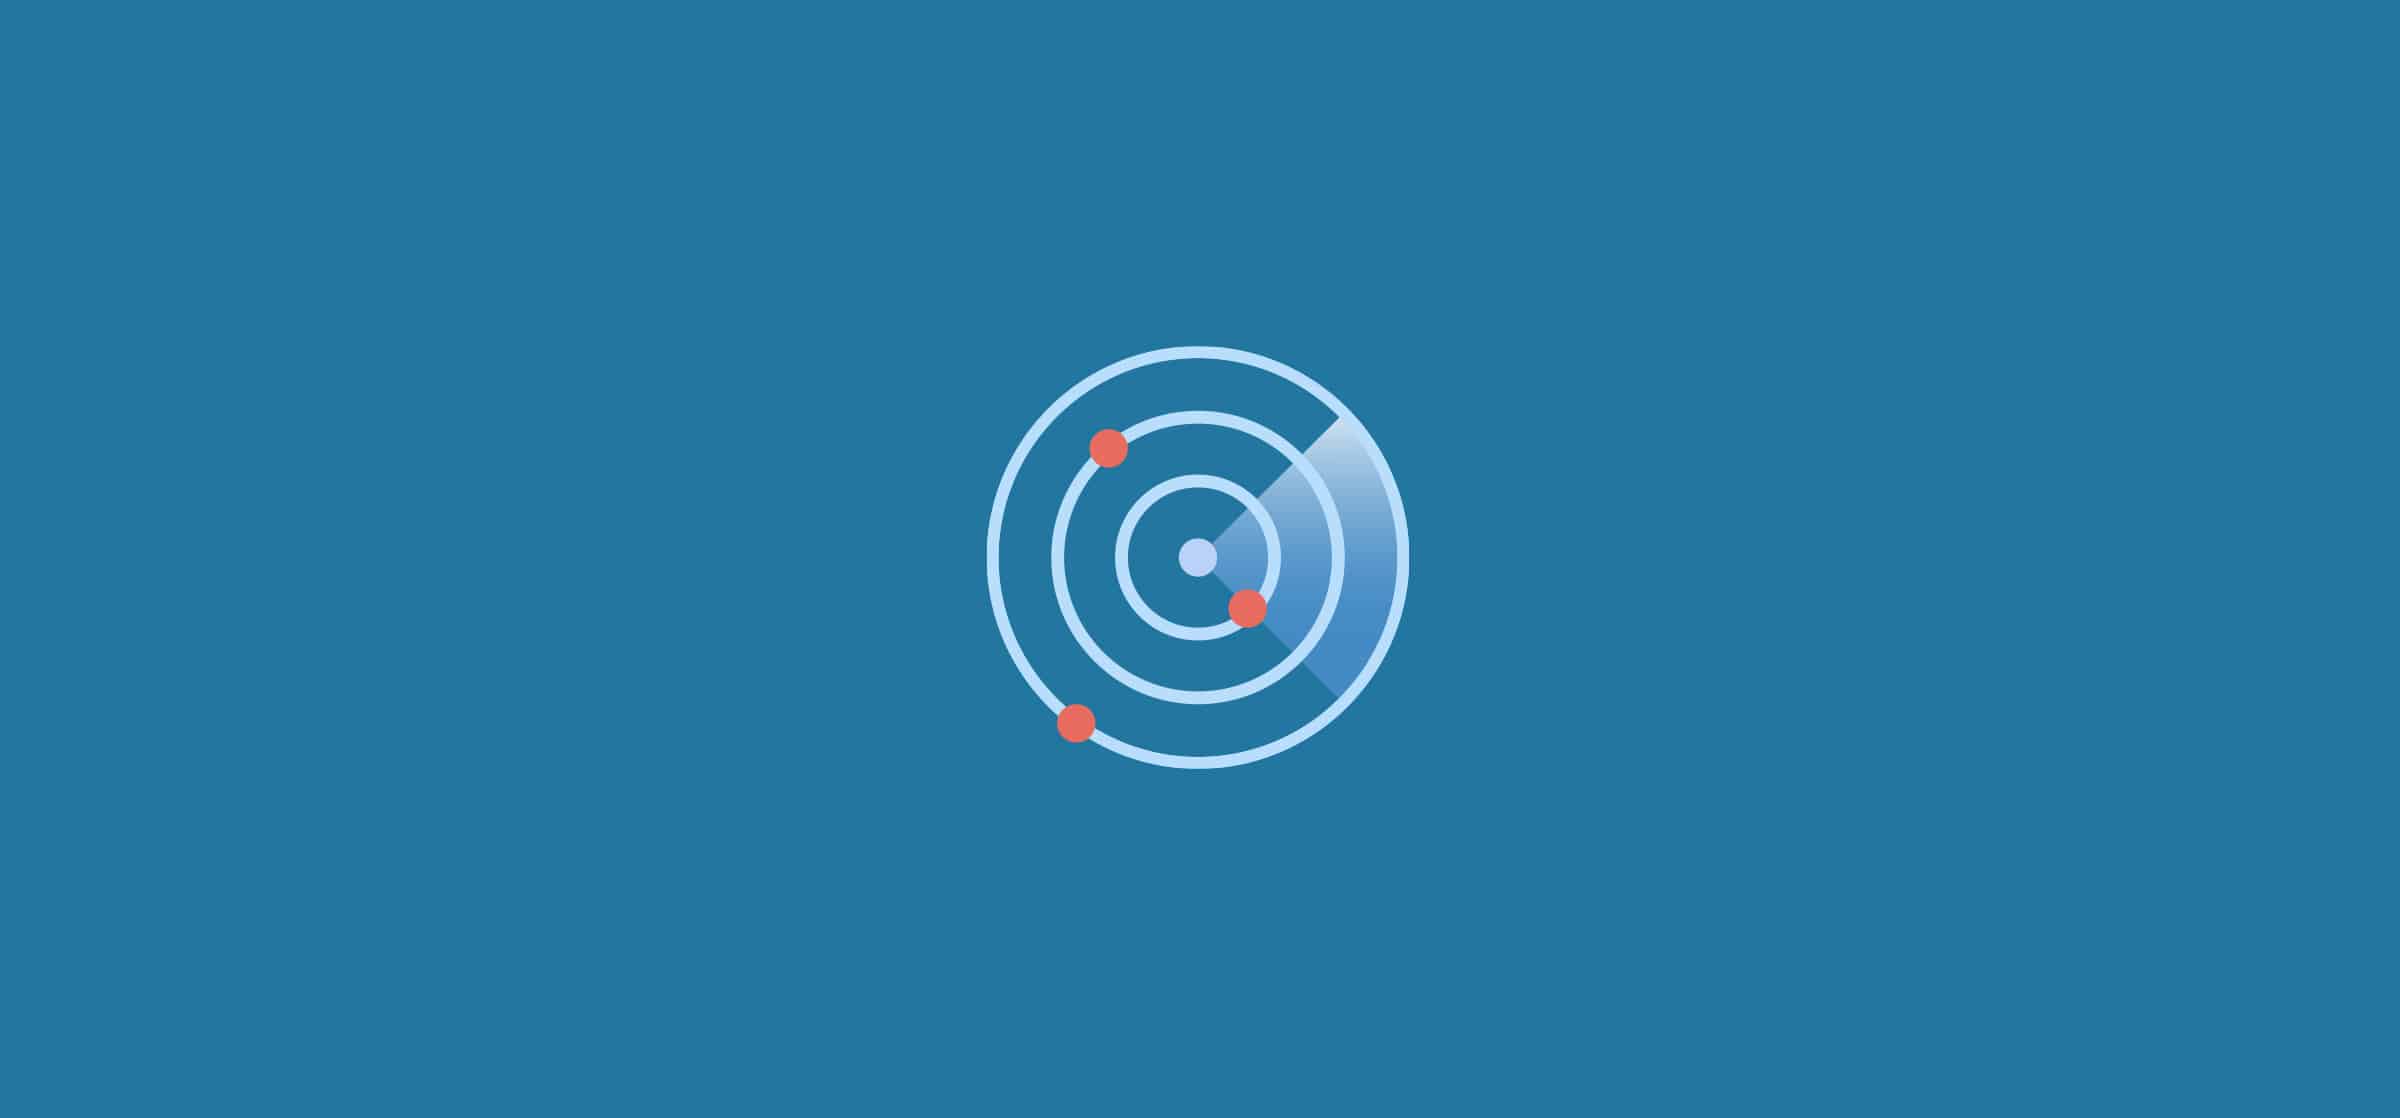 A radar with three red blips, representing the Unito's reporting integration for HubSpot and Notion